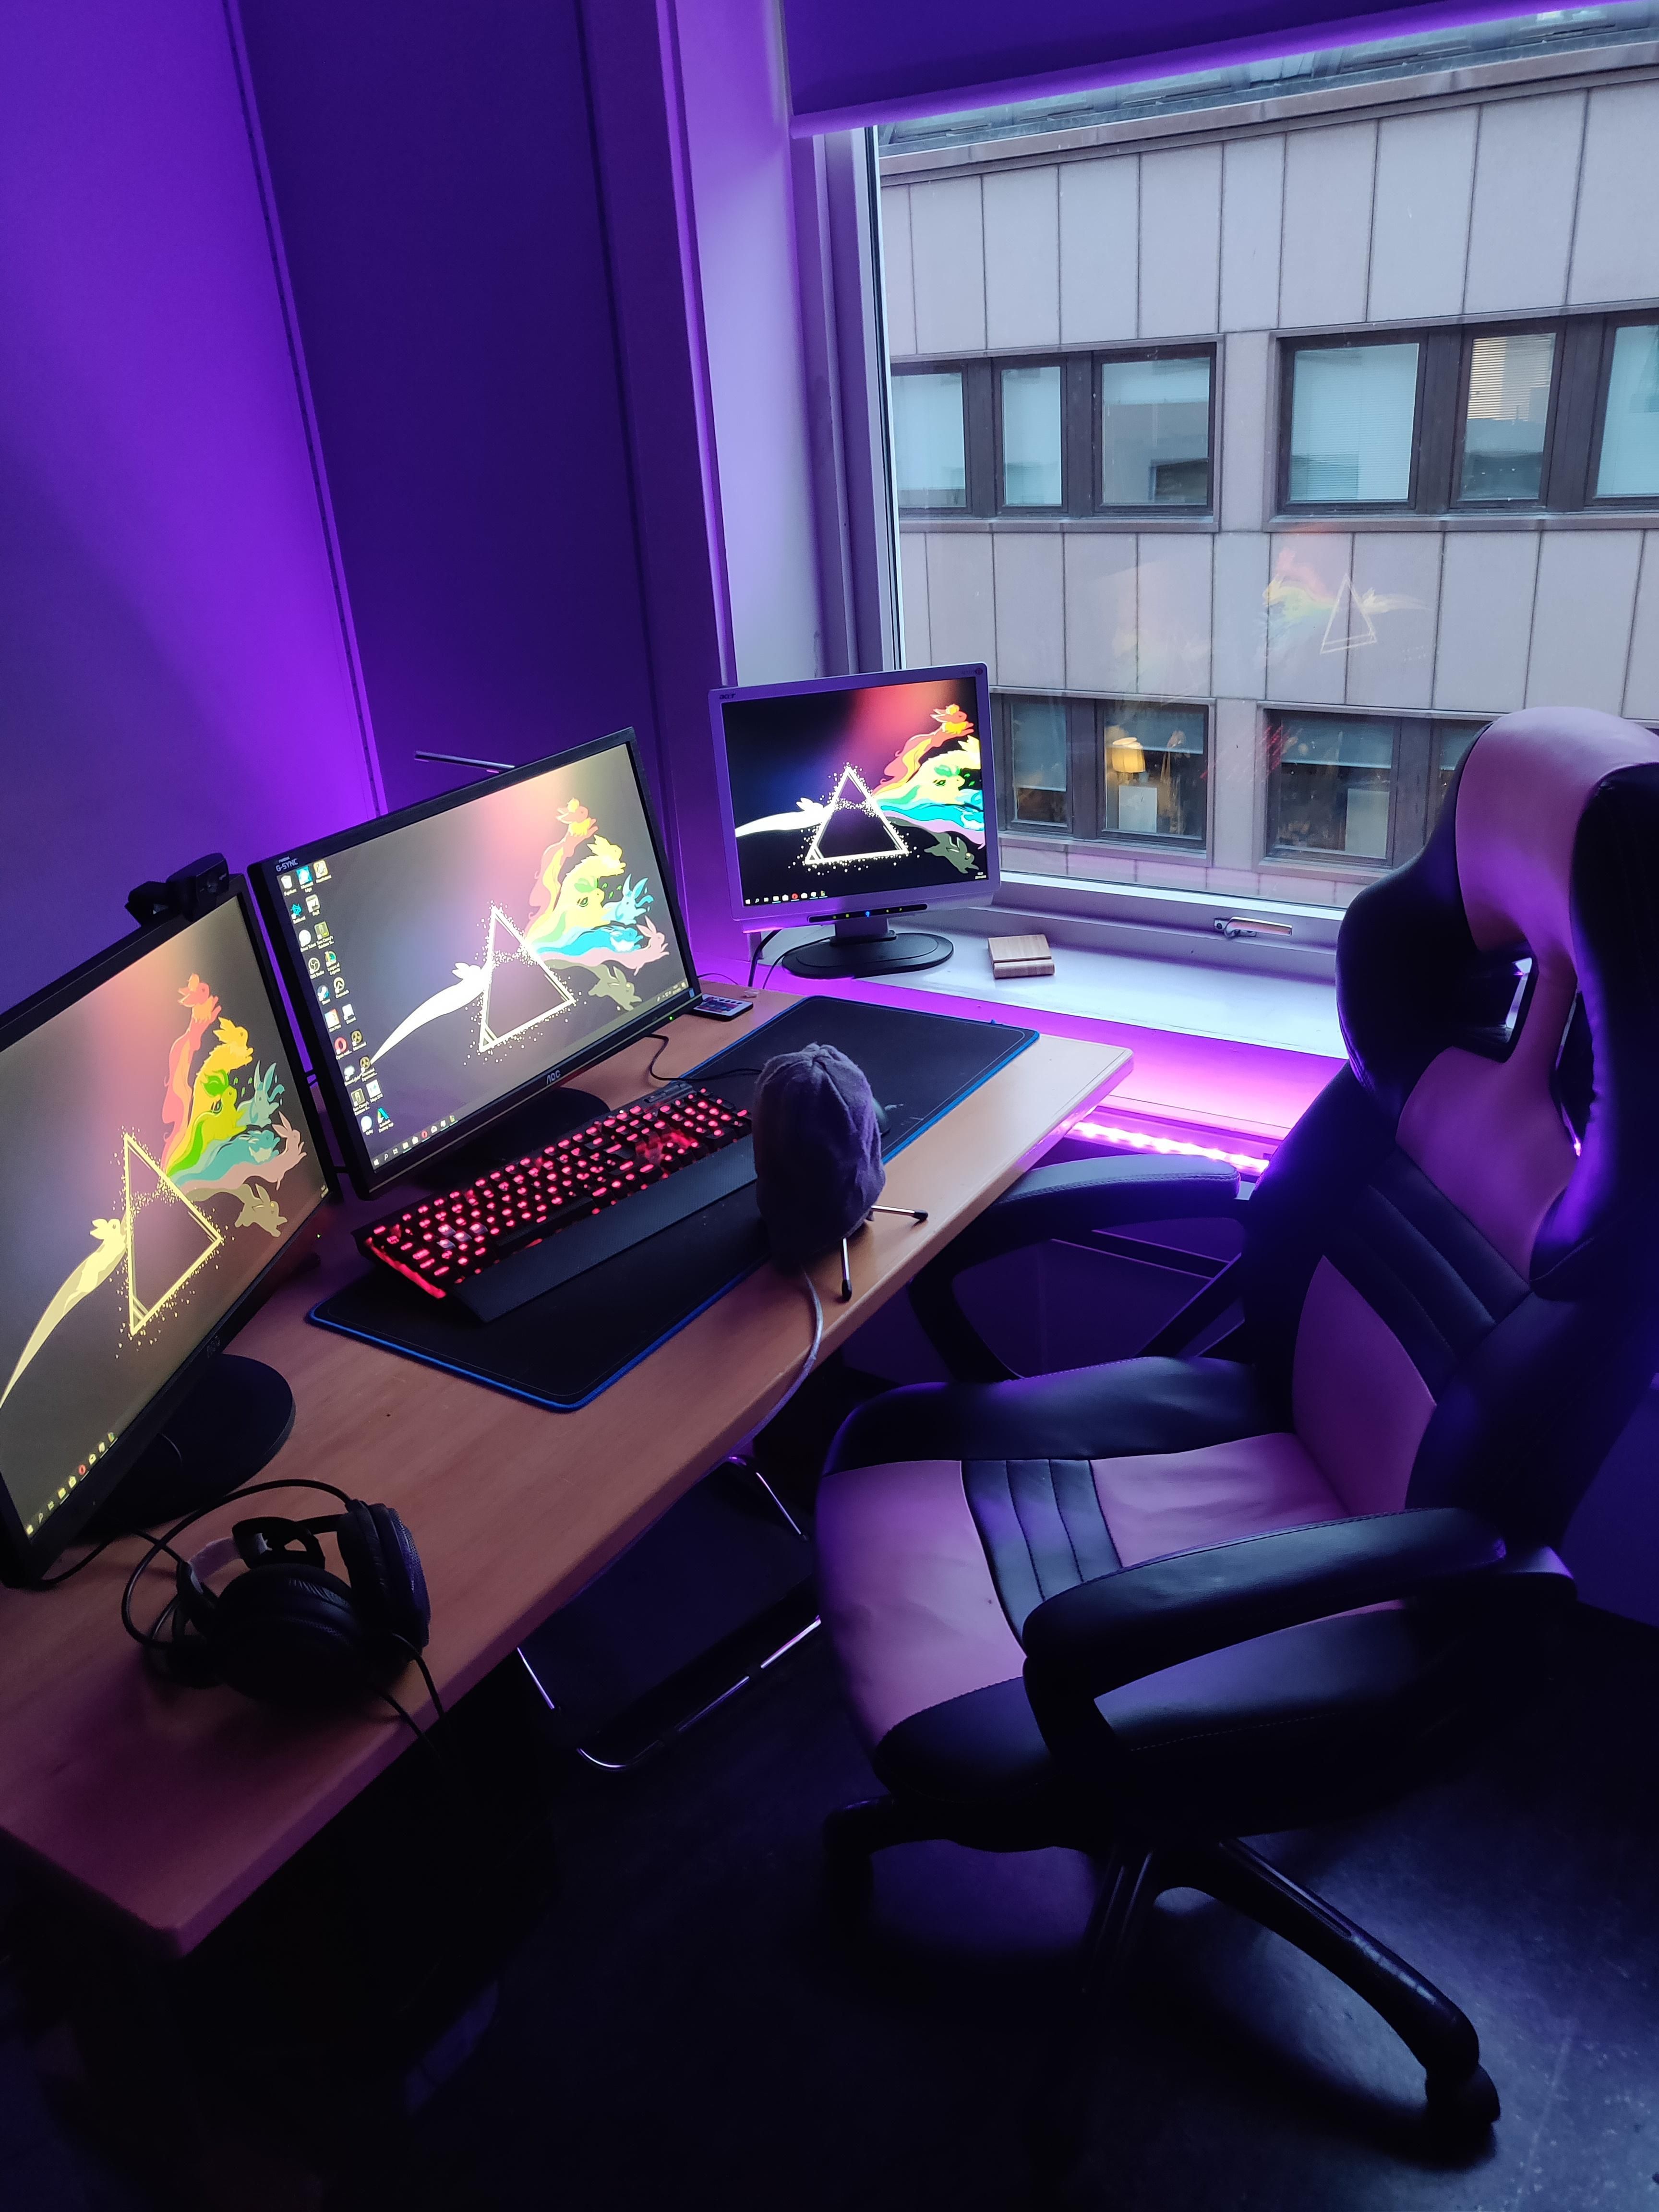 Nice Best Gaming Room Pics with Futuristic Setup